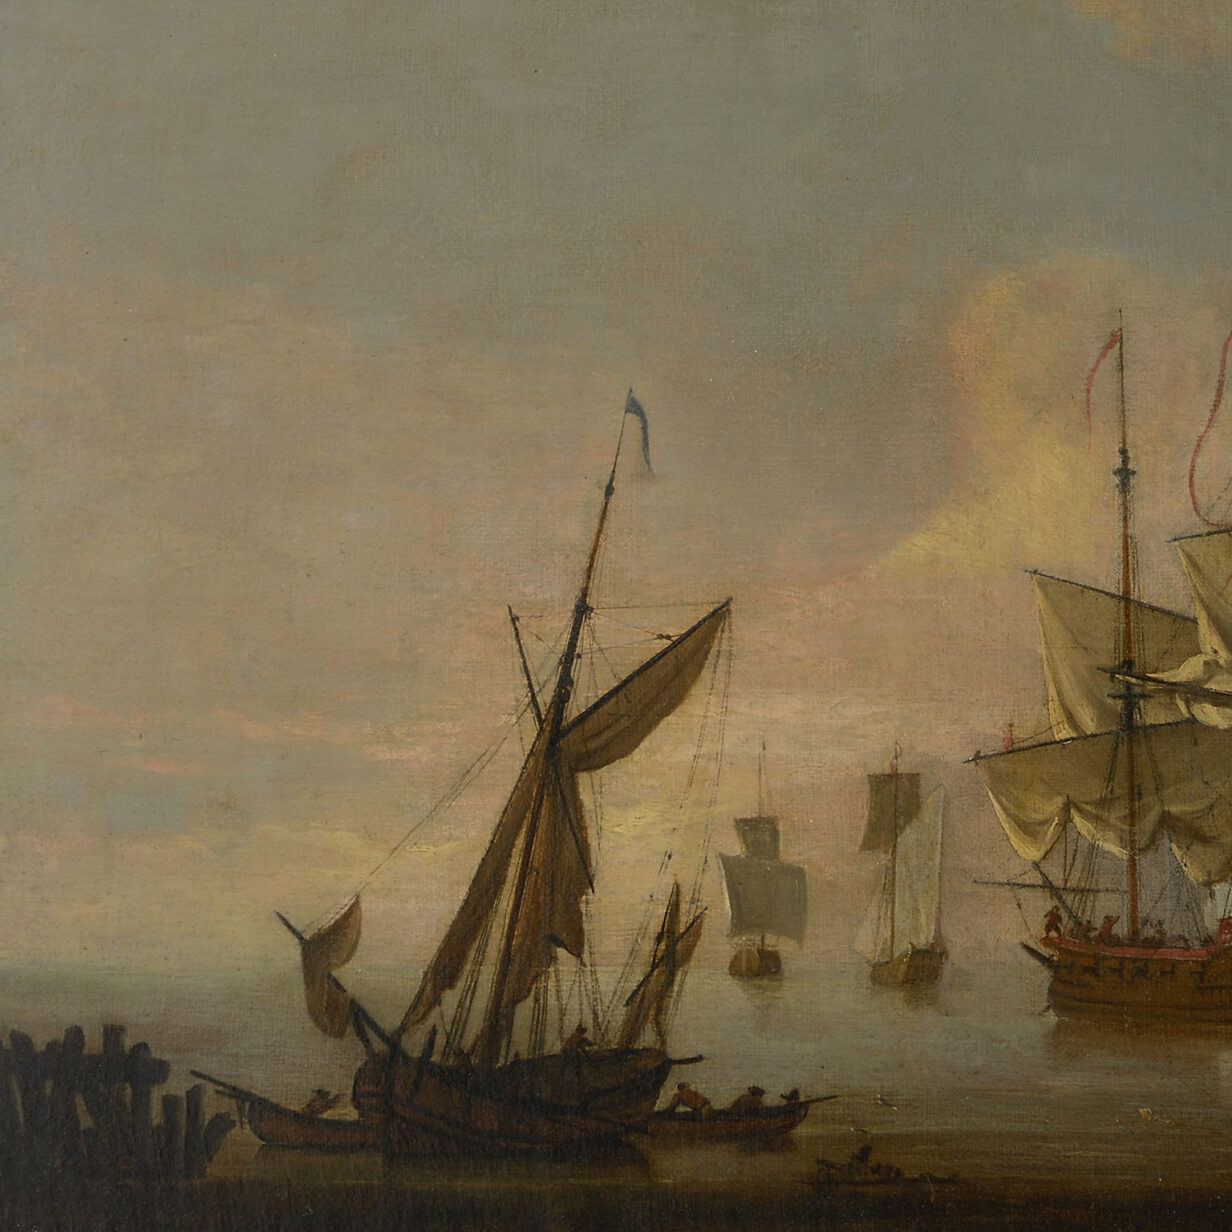 Attributed to peter monamy - an 18th century english maritime scene